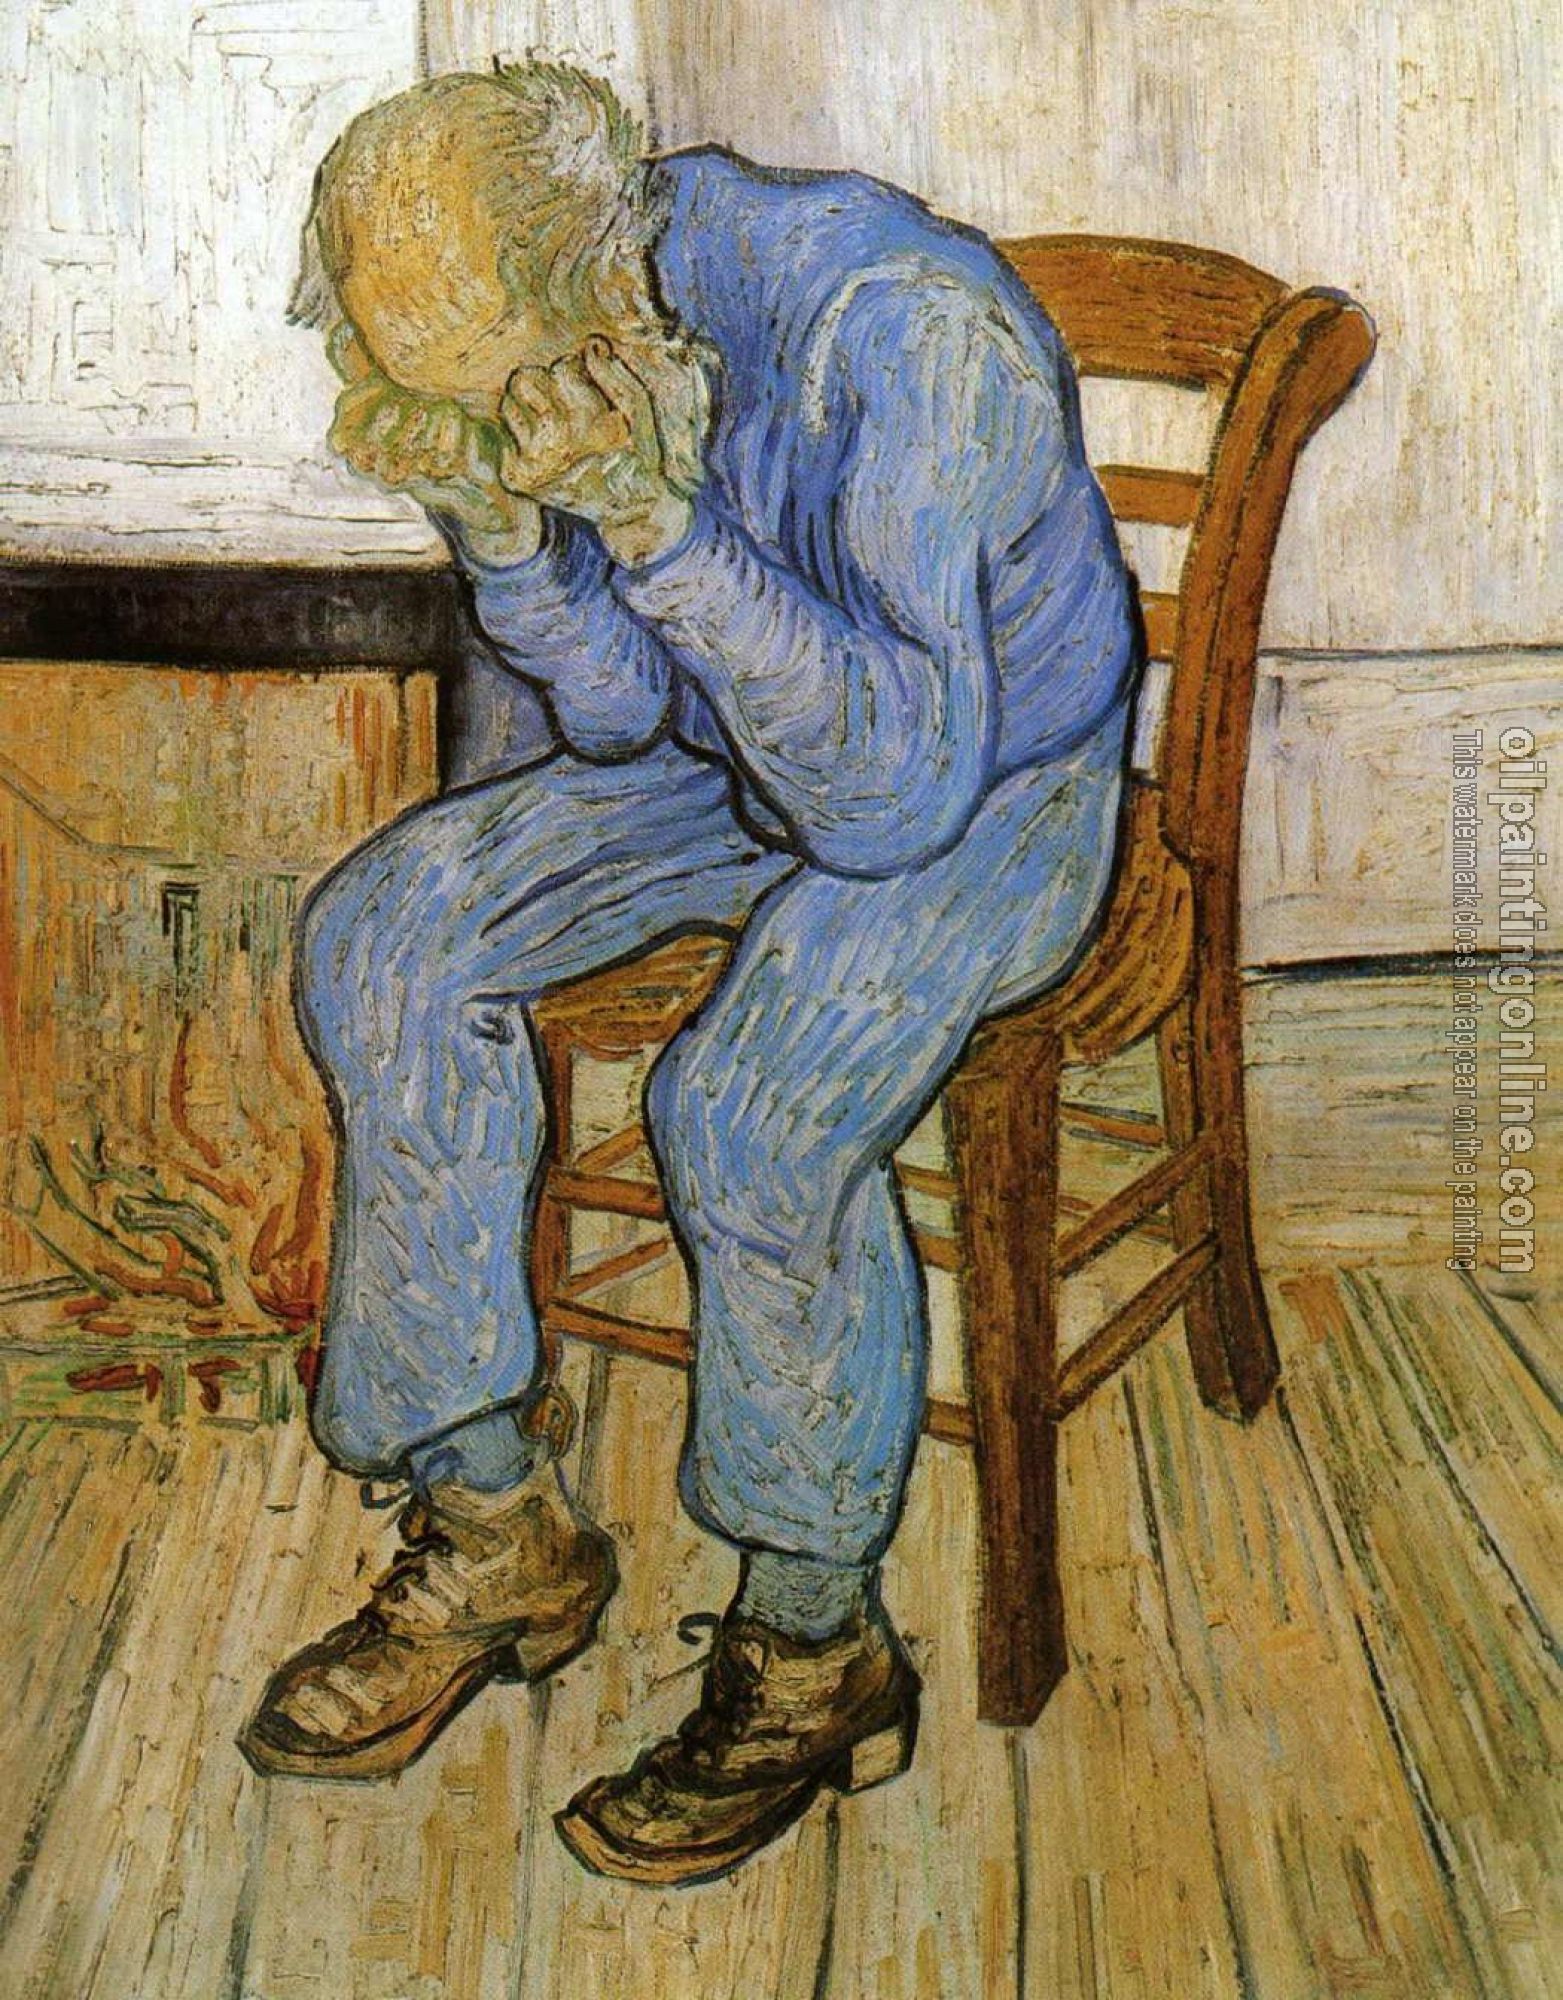 Gogh, Vincent van - Old Man in Sorrow, On the Threshold of Eternity